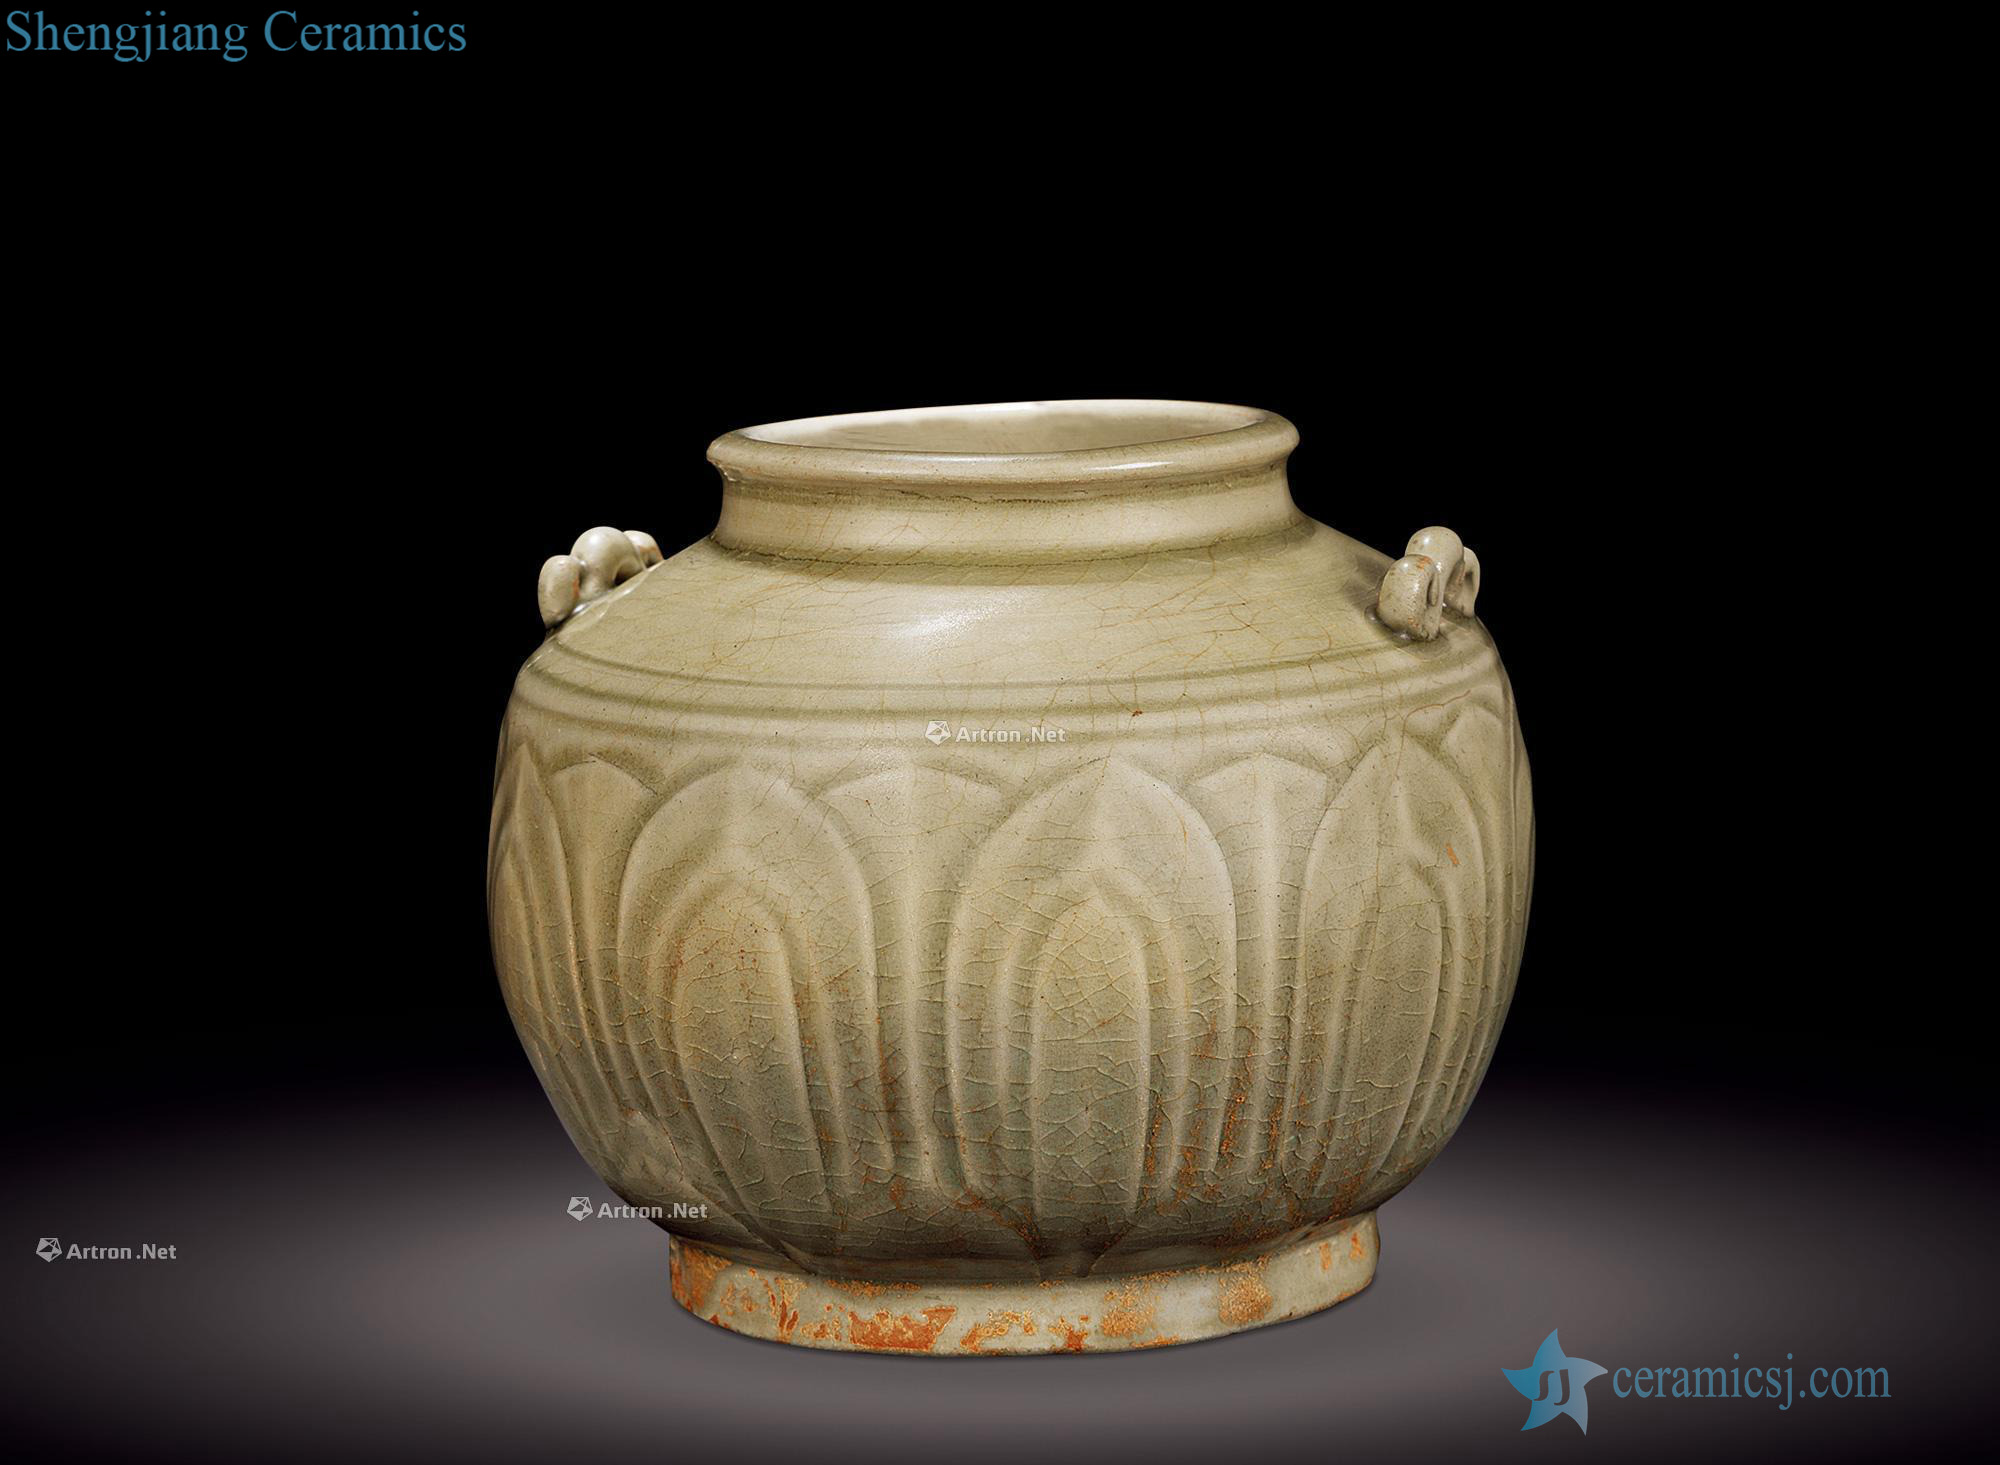 The song dynasty Yao state green glazed carved lotus-shaped grain wishful pot